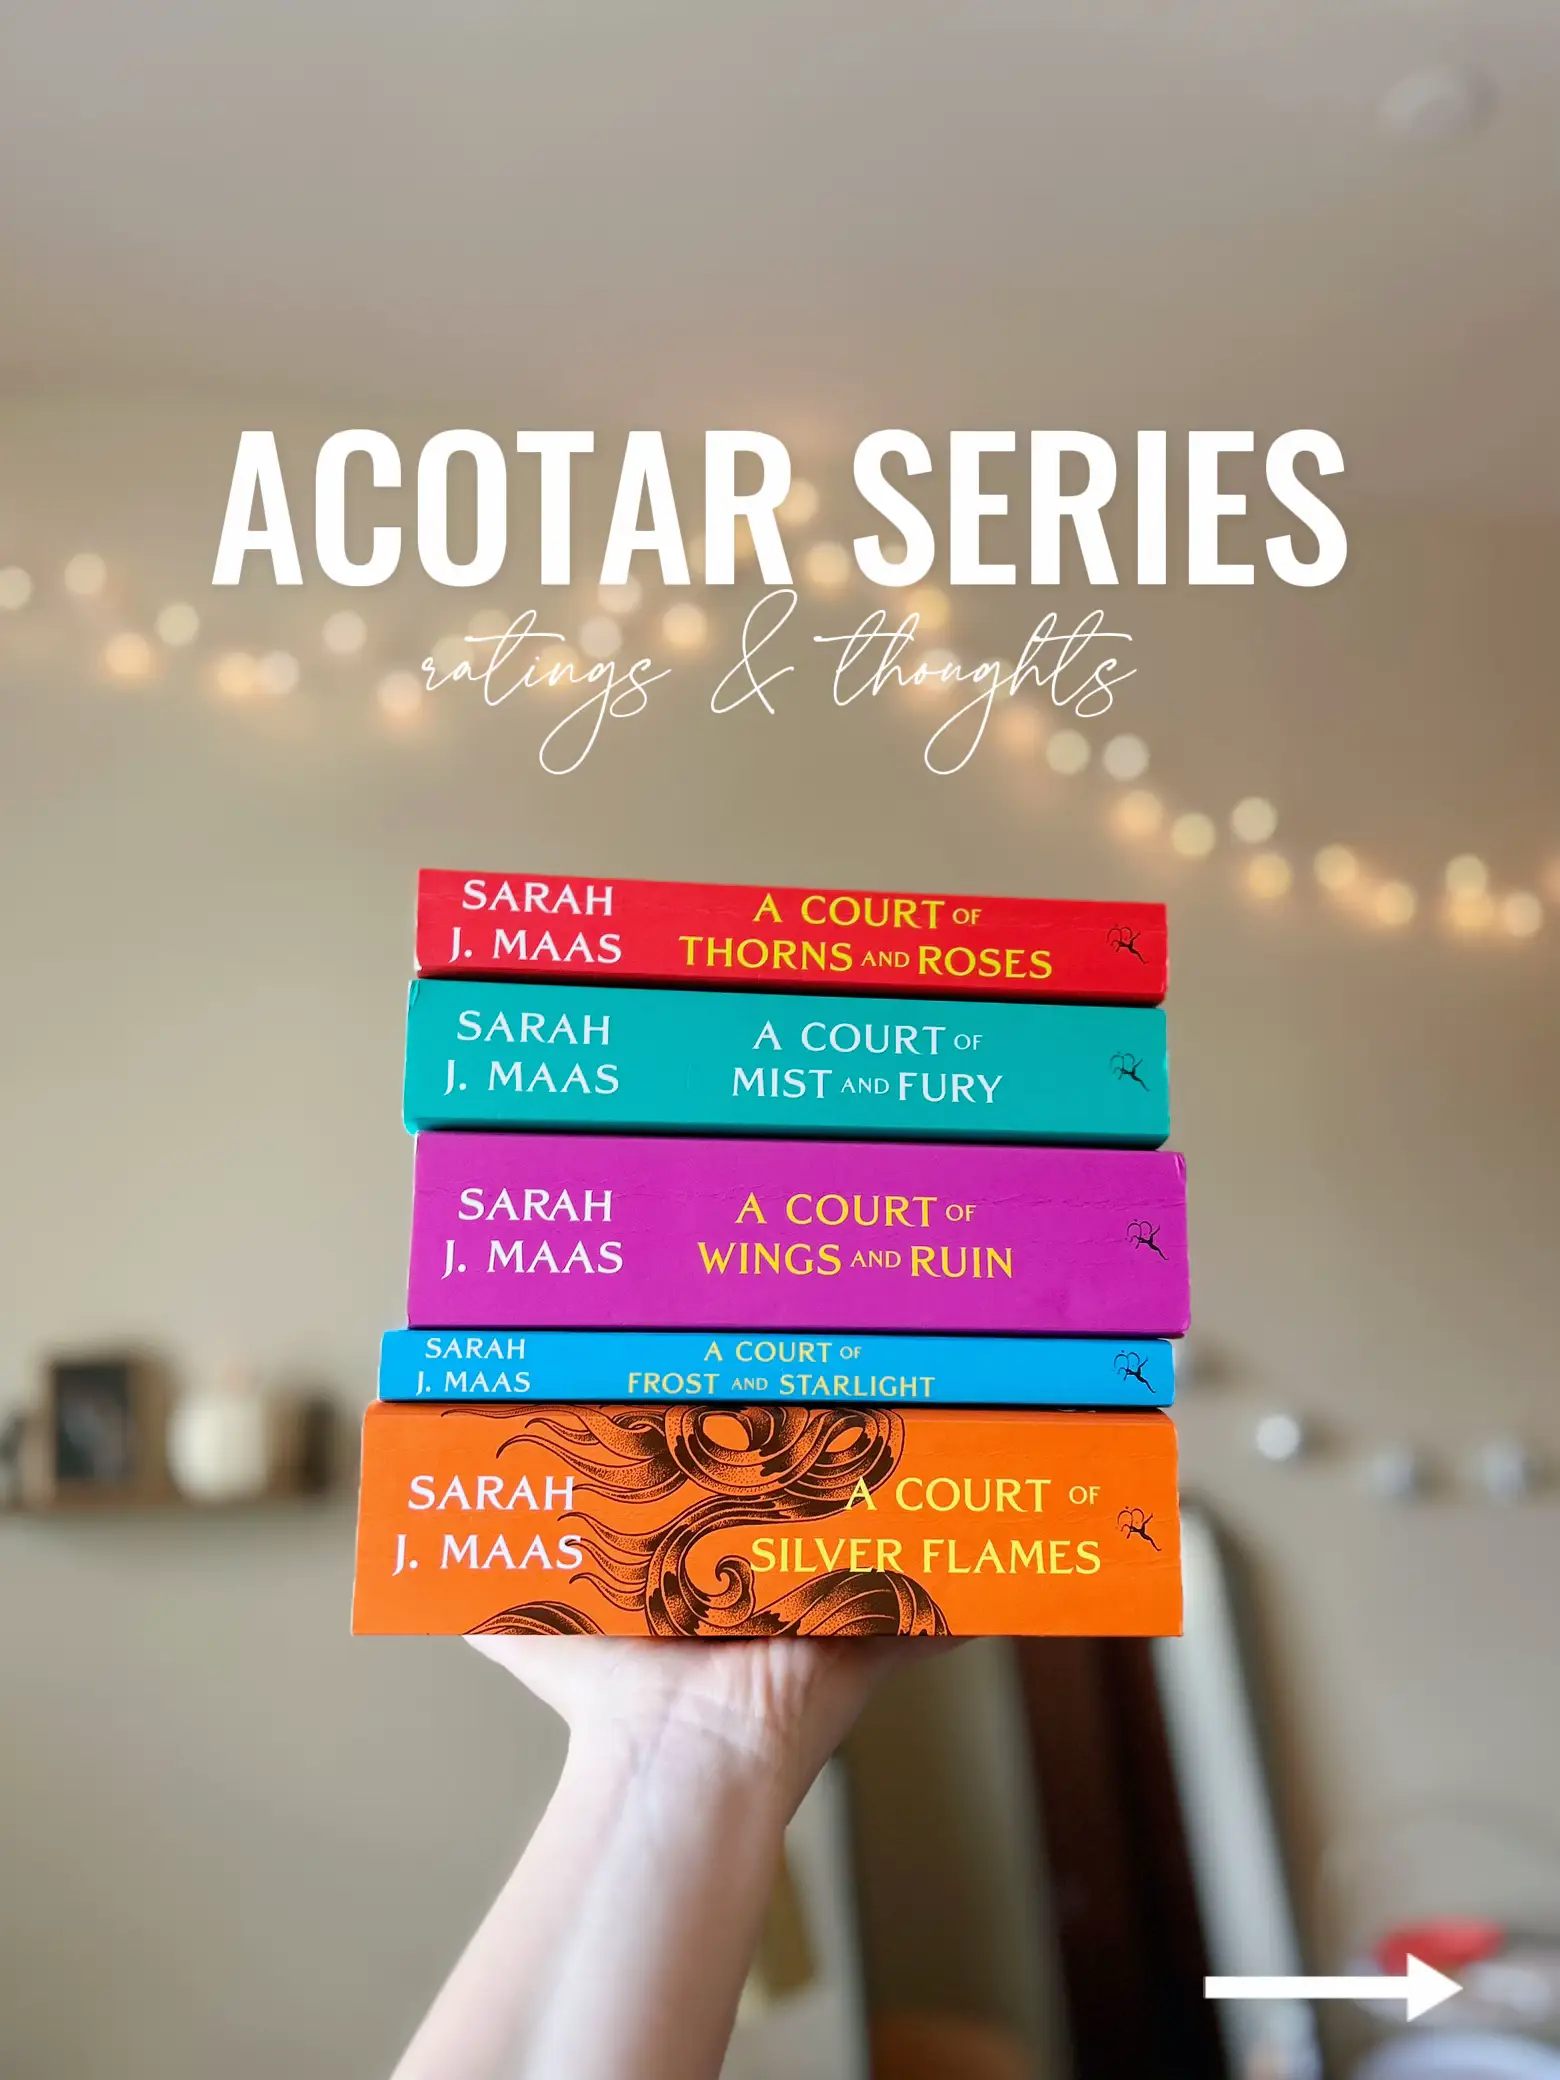 Just wanted to share with you my copy of ACOTAR series (Italian version)  illustrated ✨🖤 : r/acotar